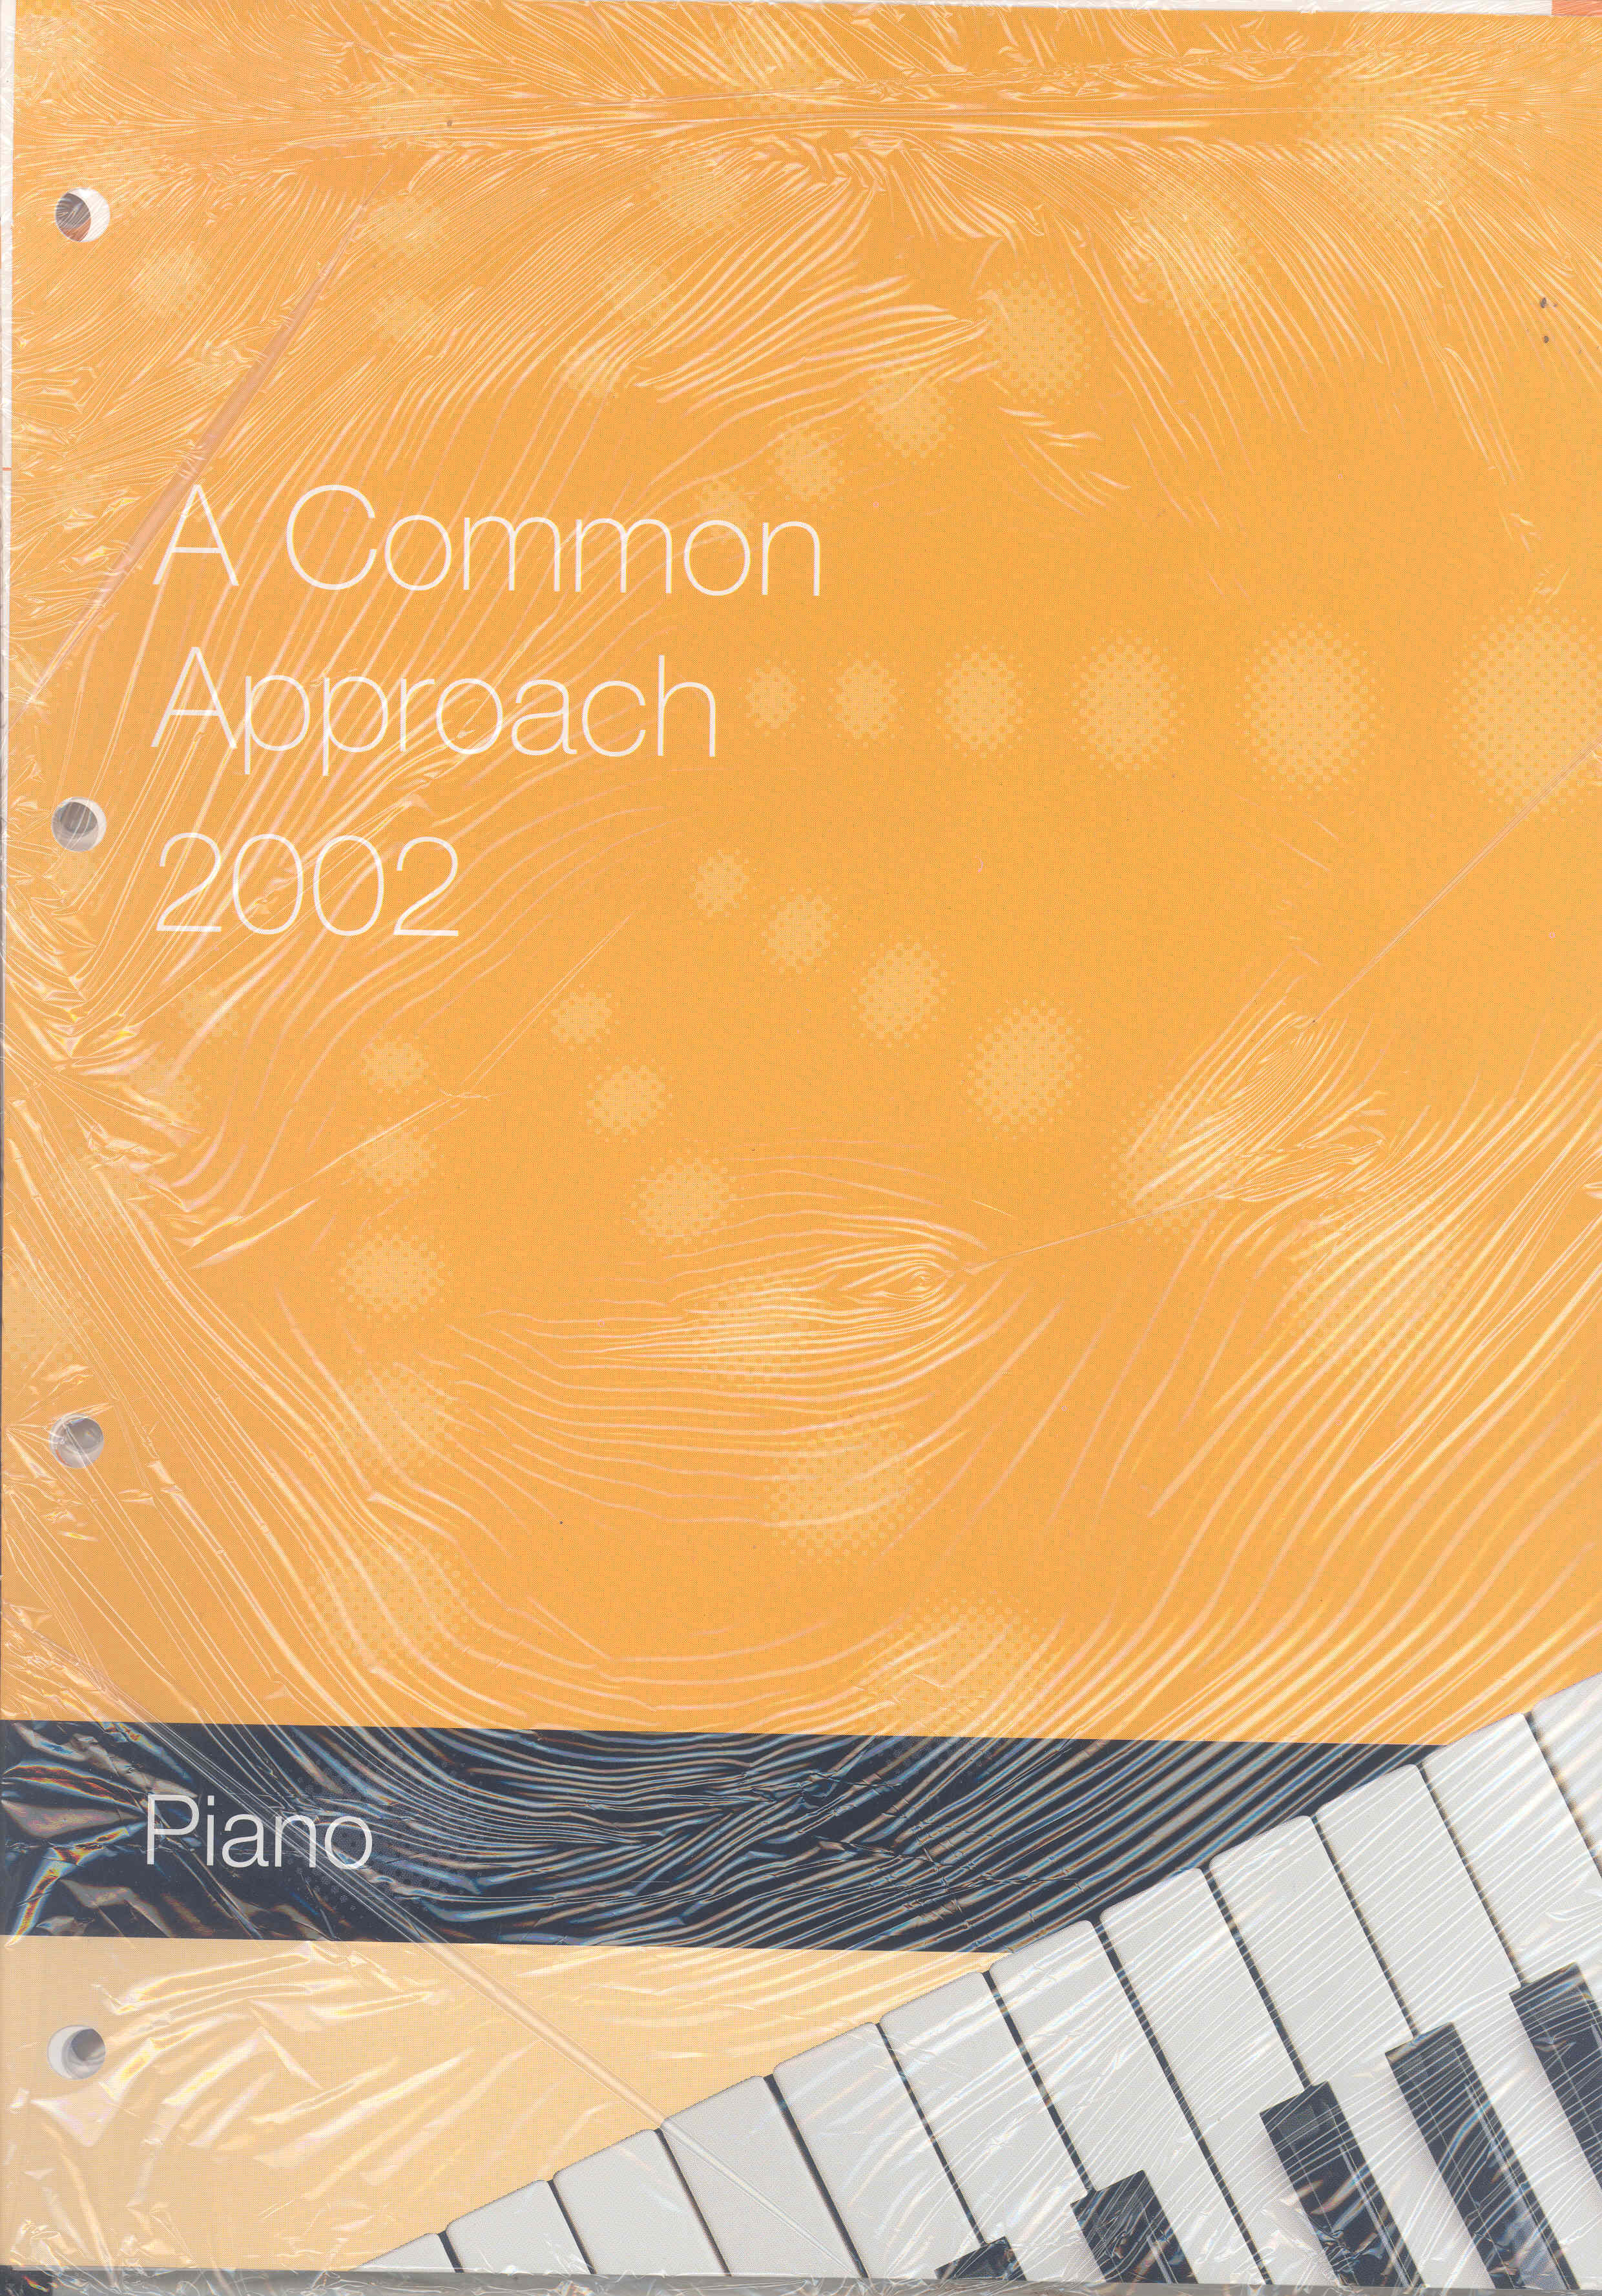 Common Approach 2002 Piano Insert Sheet Music Songbook